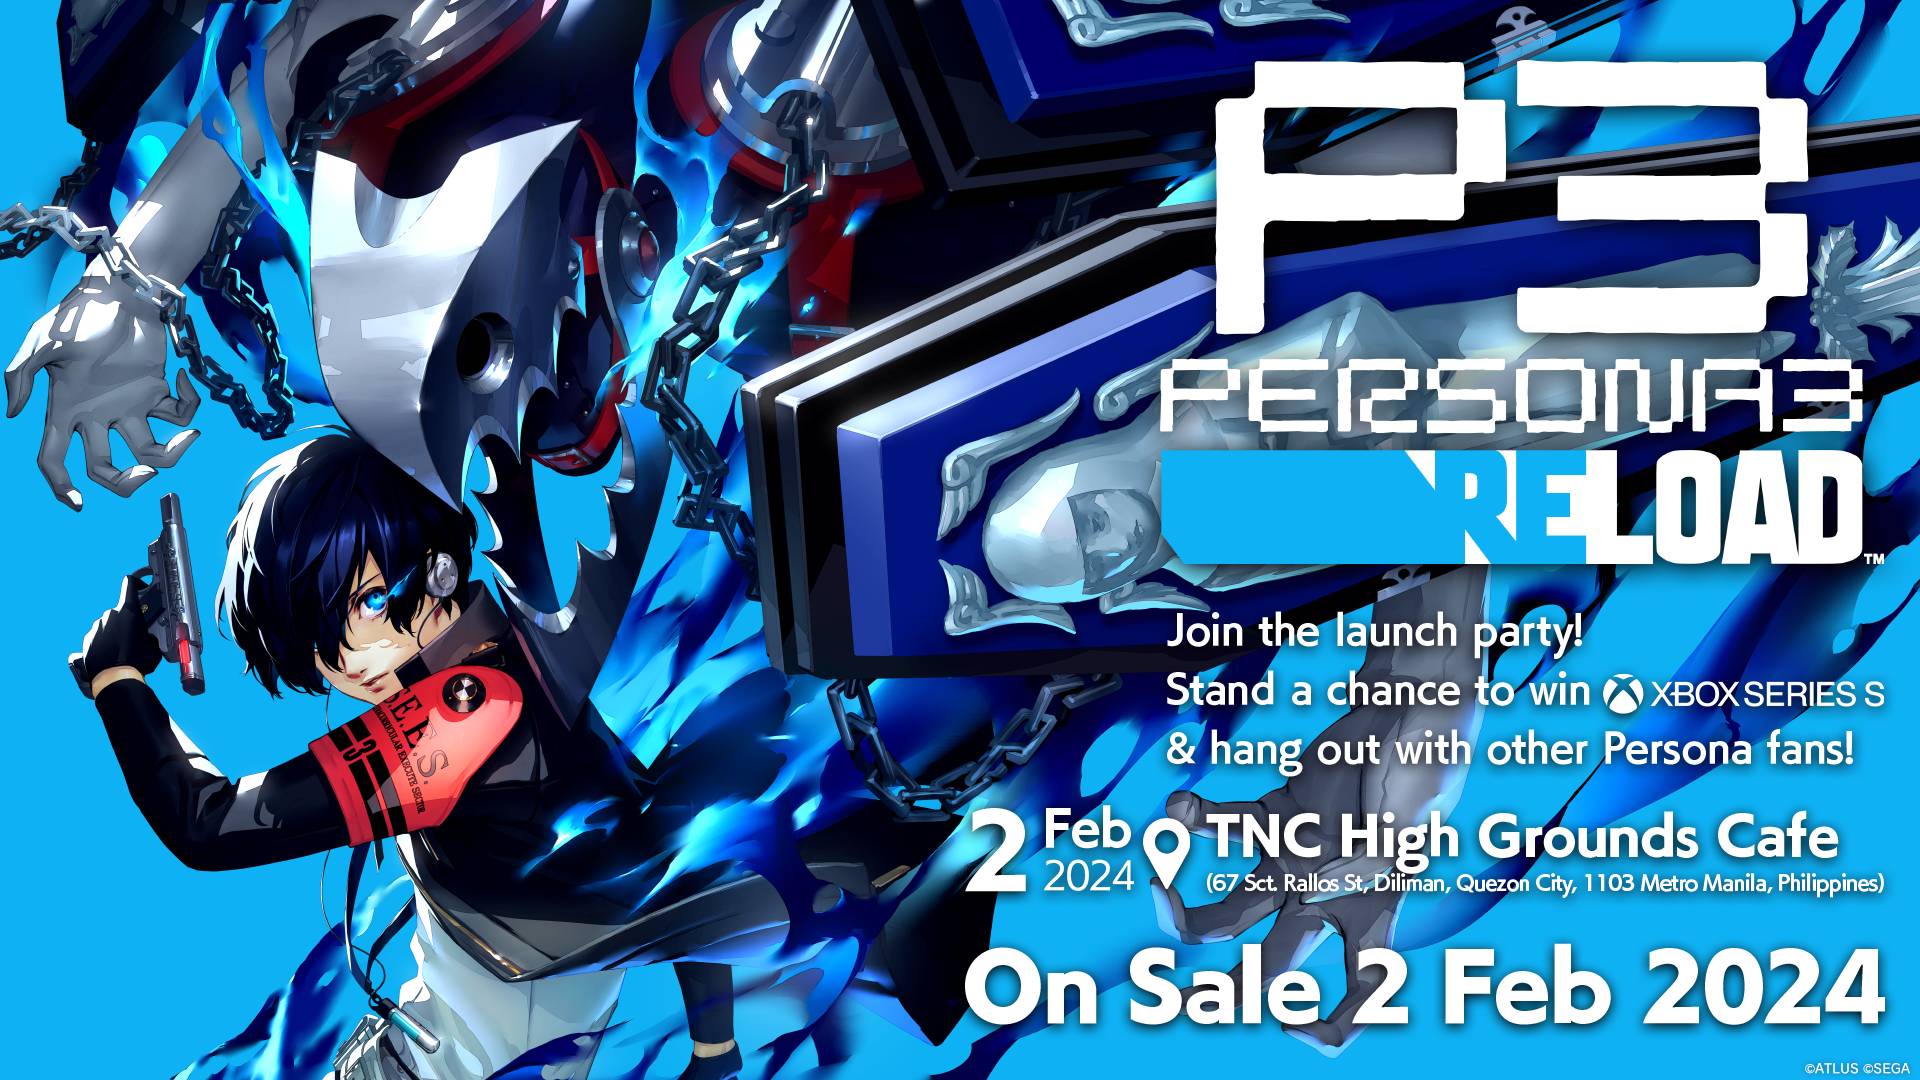 Persona 3 Reload Fans Celebrate Launch Party in the Philippines! P3R Cafe KV